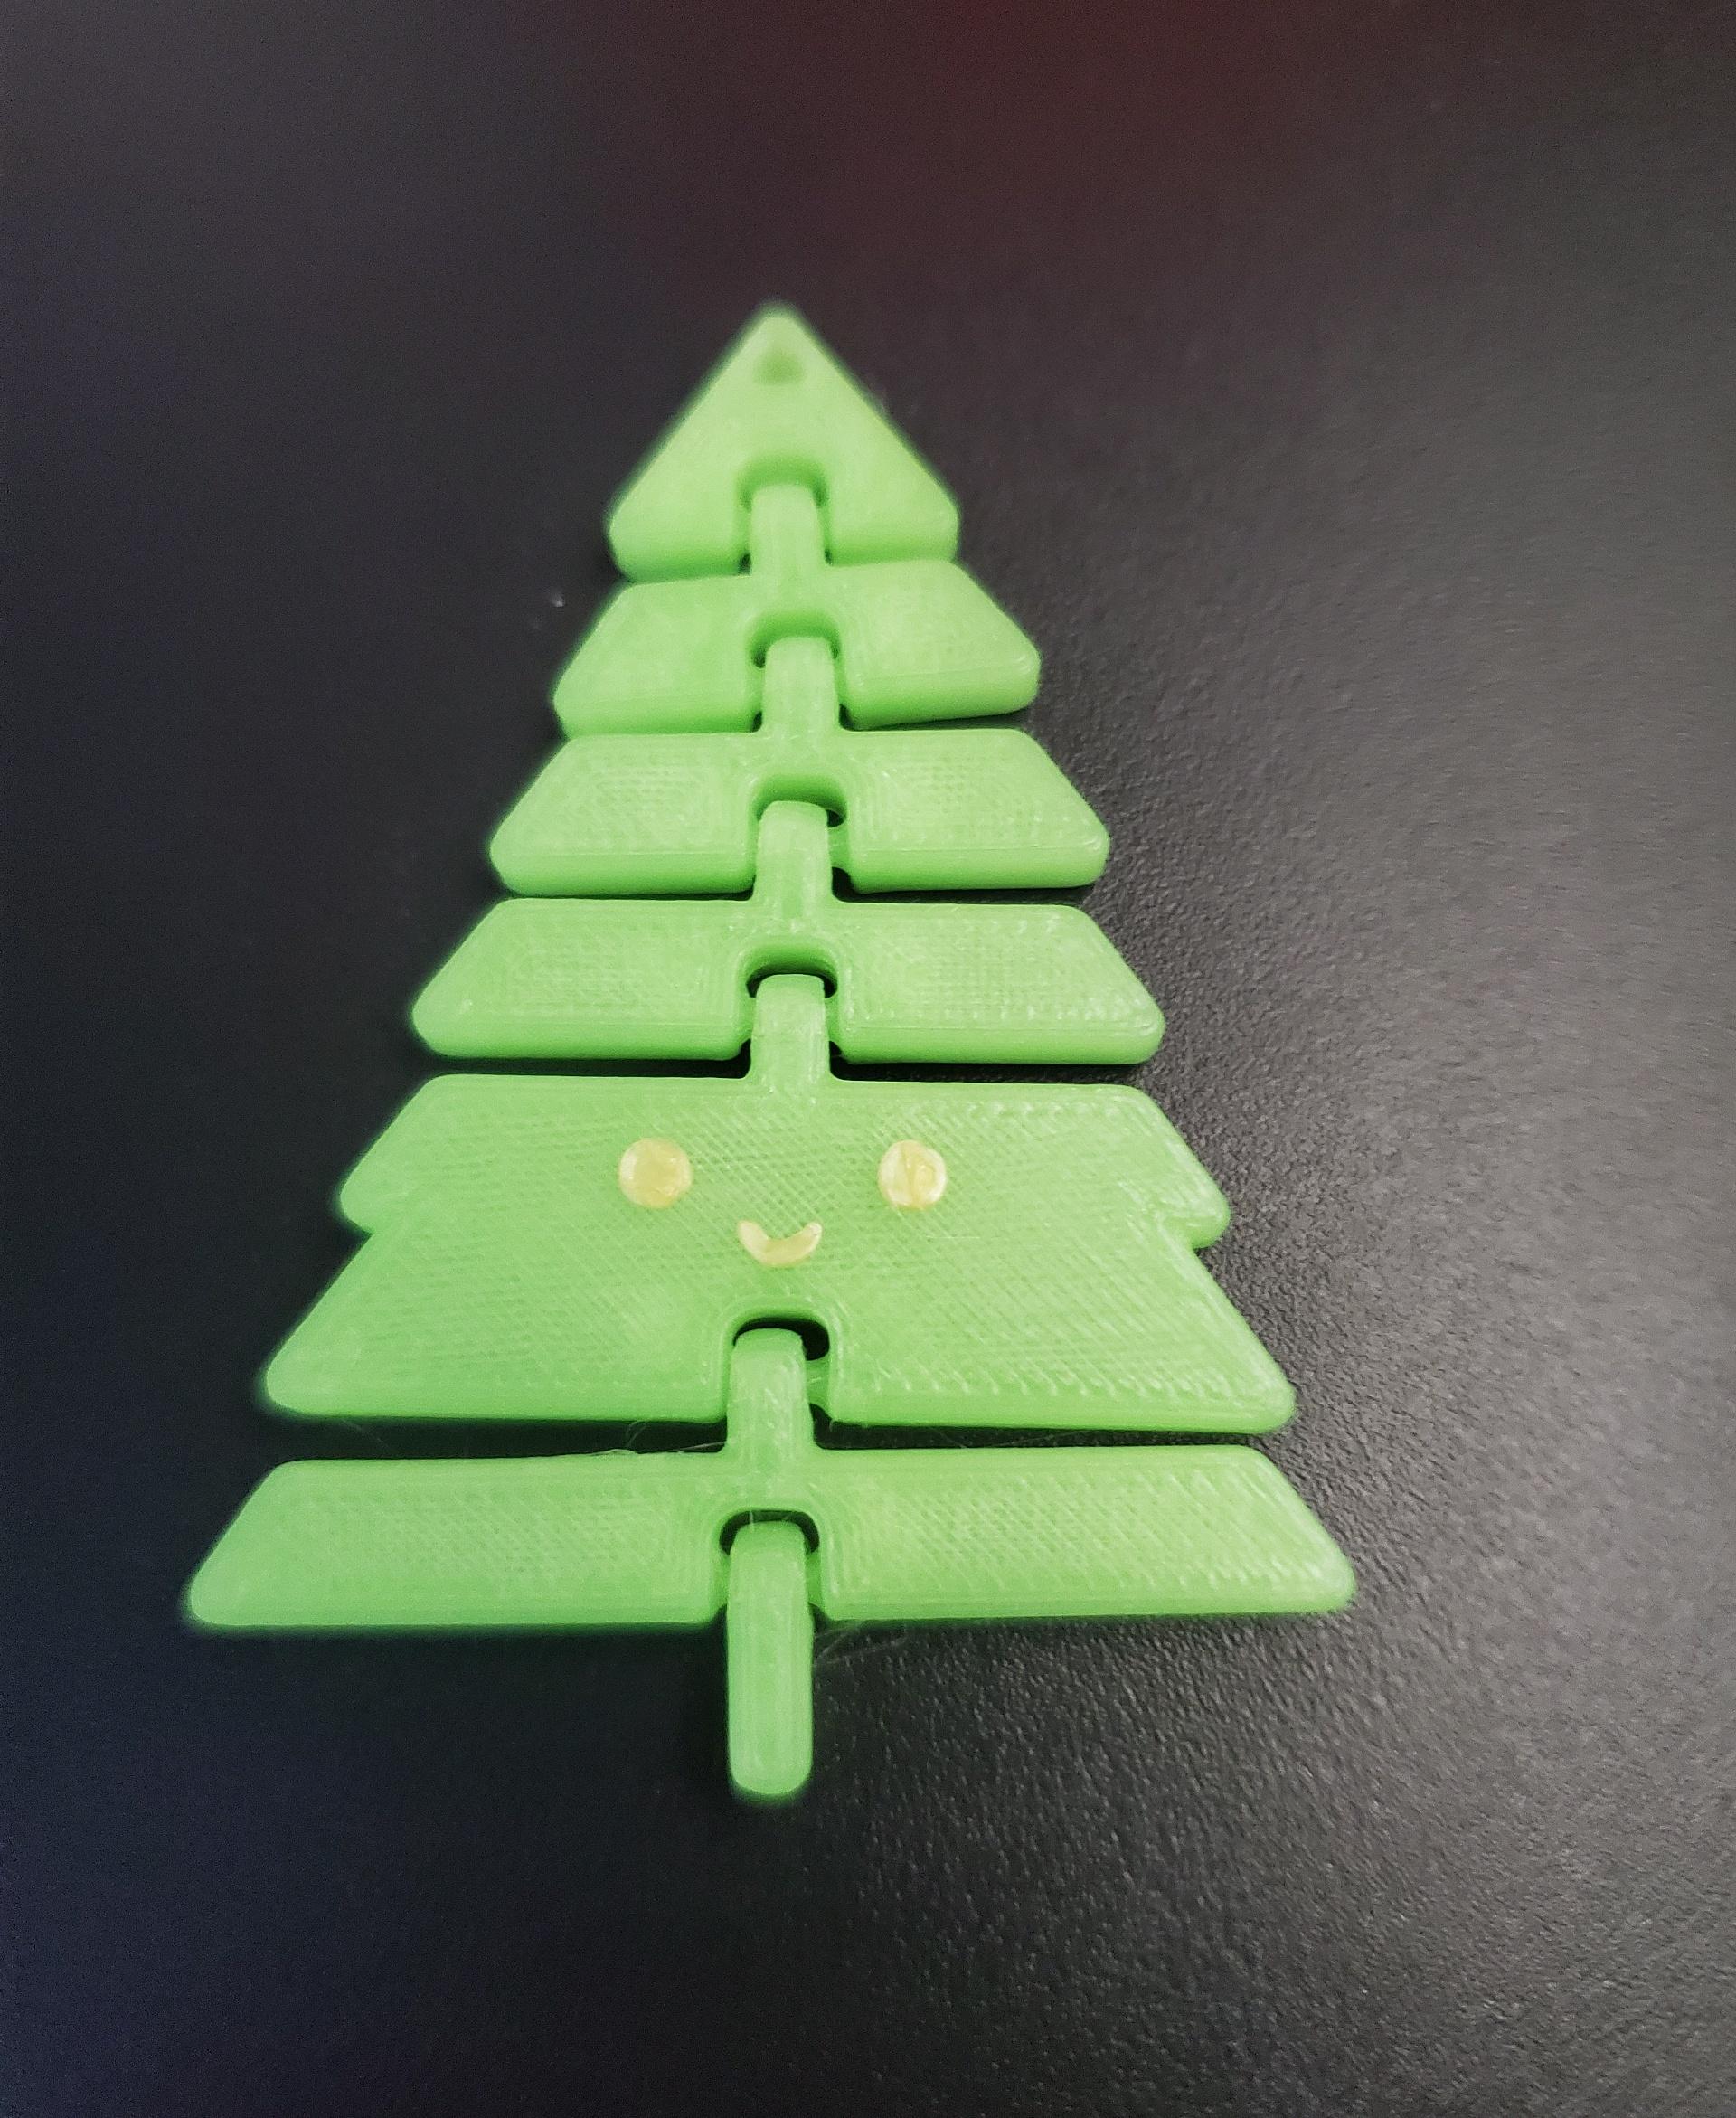 Articulated Kawaii Christmas Tree Keychain - Print in place fidget toy - 3mf - polymaker luminous green - 3d model